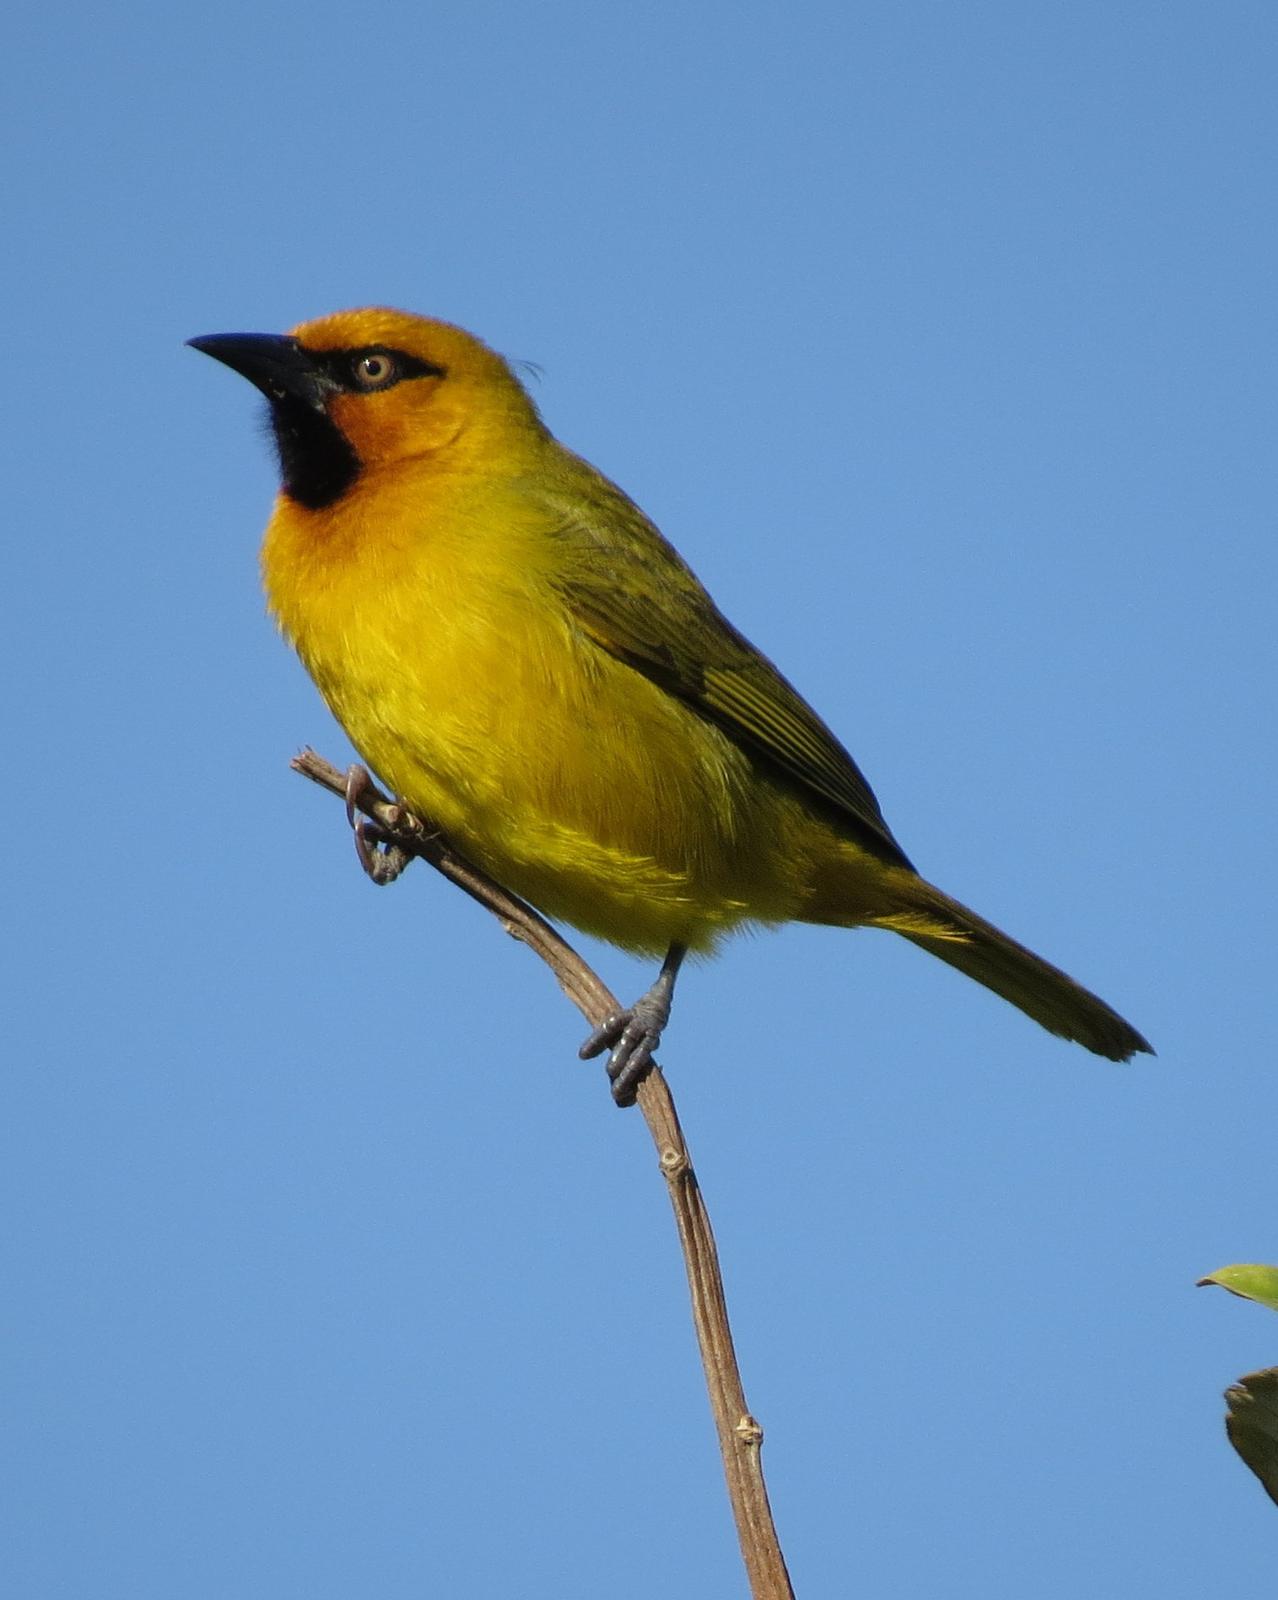 Spectacled Weaver Photo by Richard  Lowe